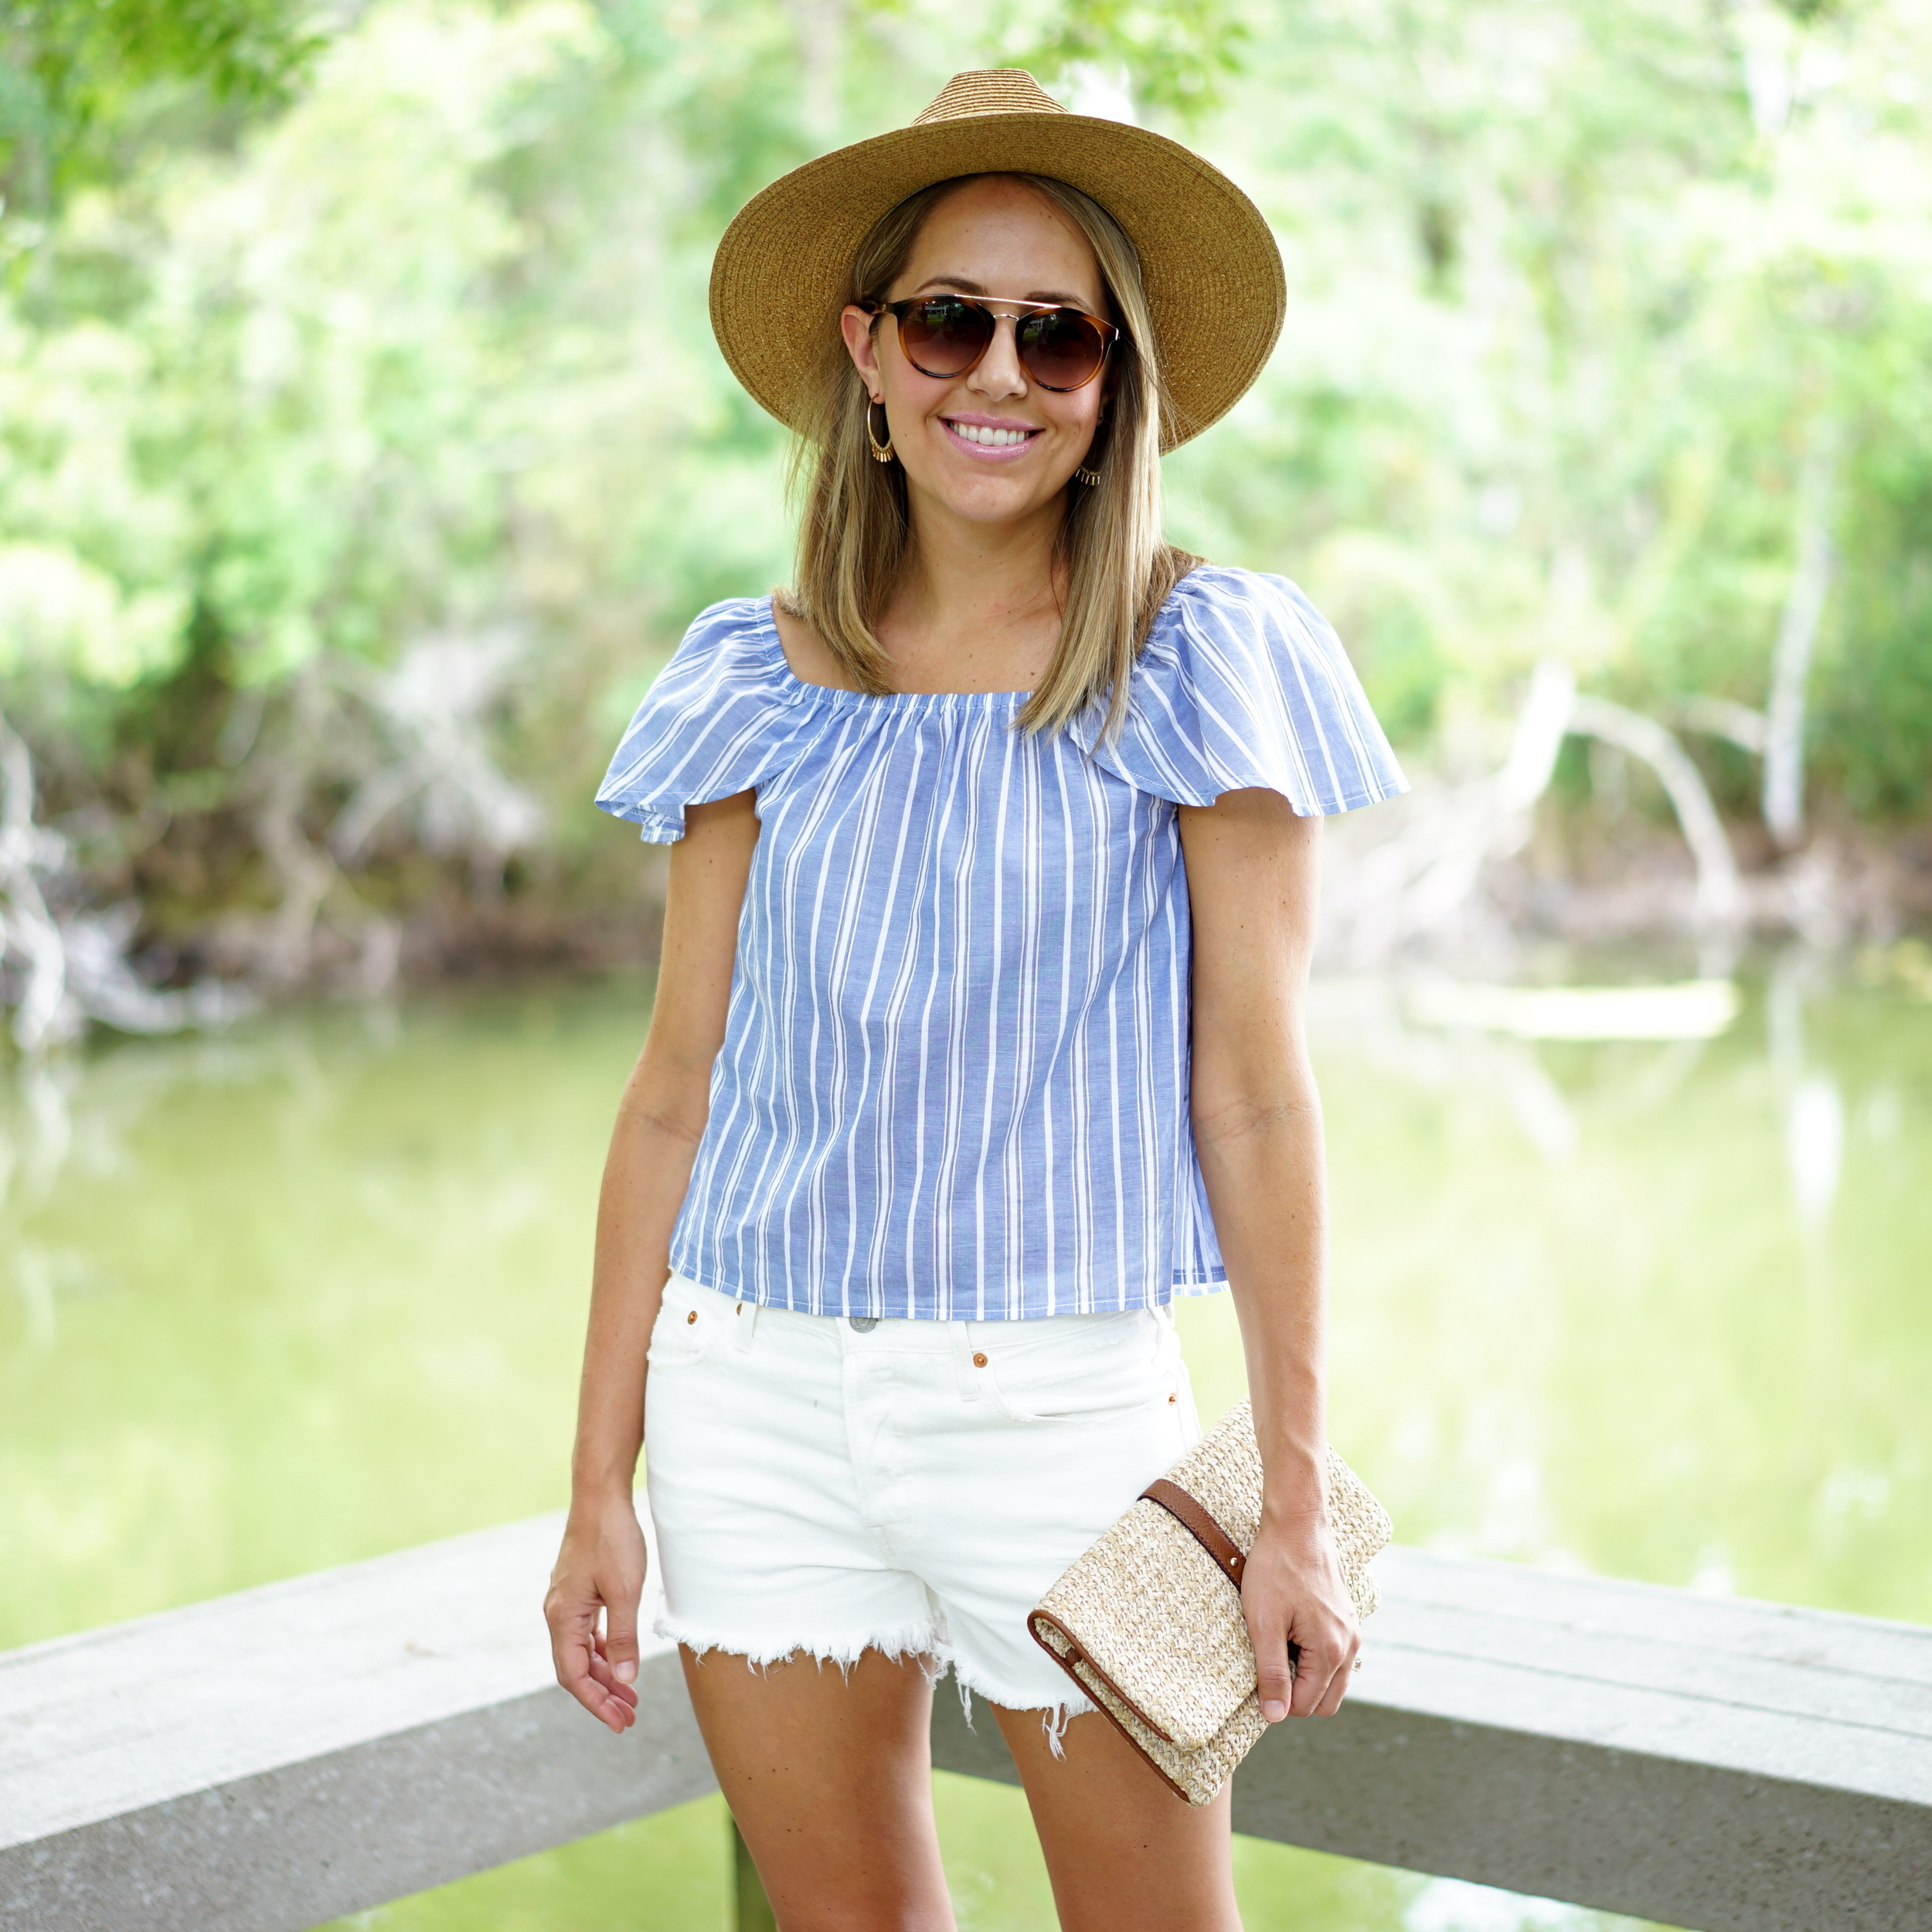 Today's Everyday Fashion: Espadrilles and Stripes — J's Everyday Fashion